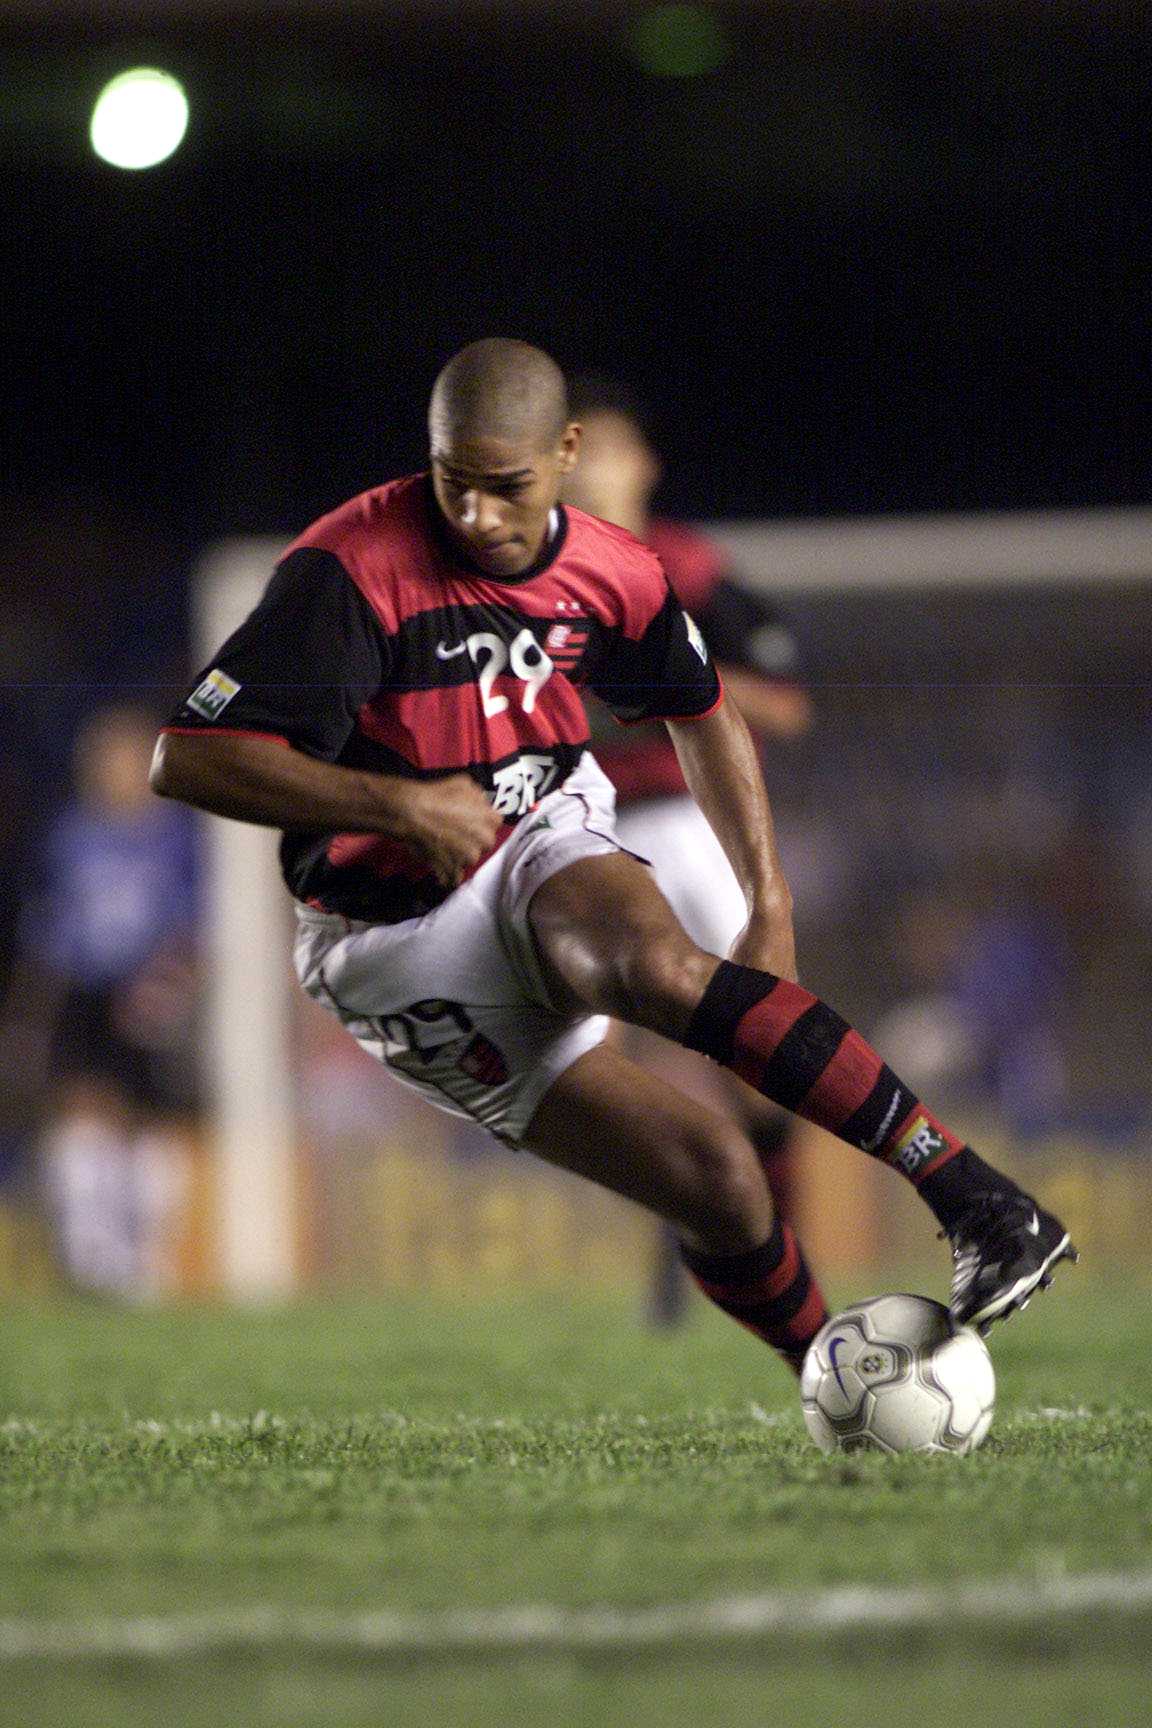 <p><span>Despite these obstacles, young Adriano found refuge in football. It was his only escape from his day-to-day turmoil. From an early age, he impressed the other children in the narrow streets of the city with his ball skills. </span></p>